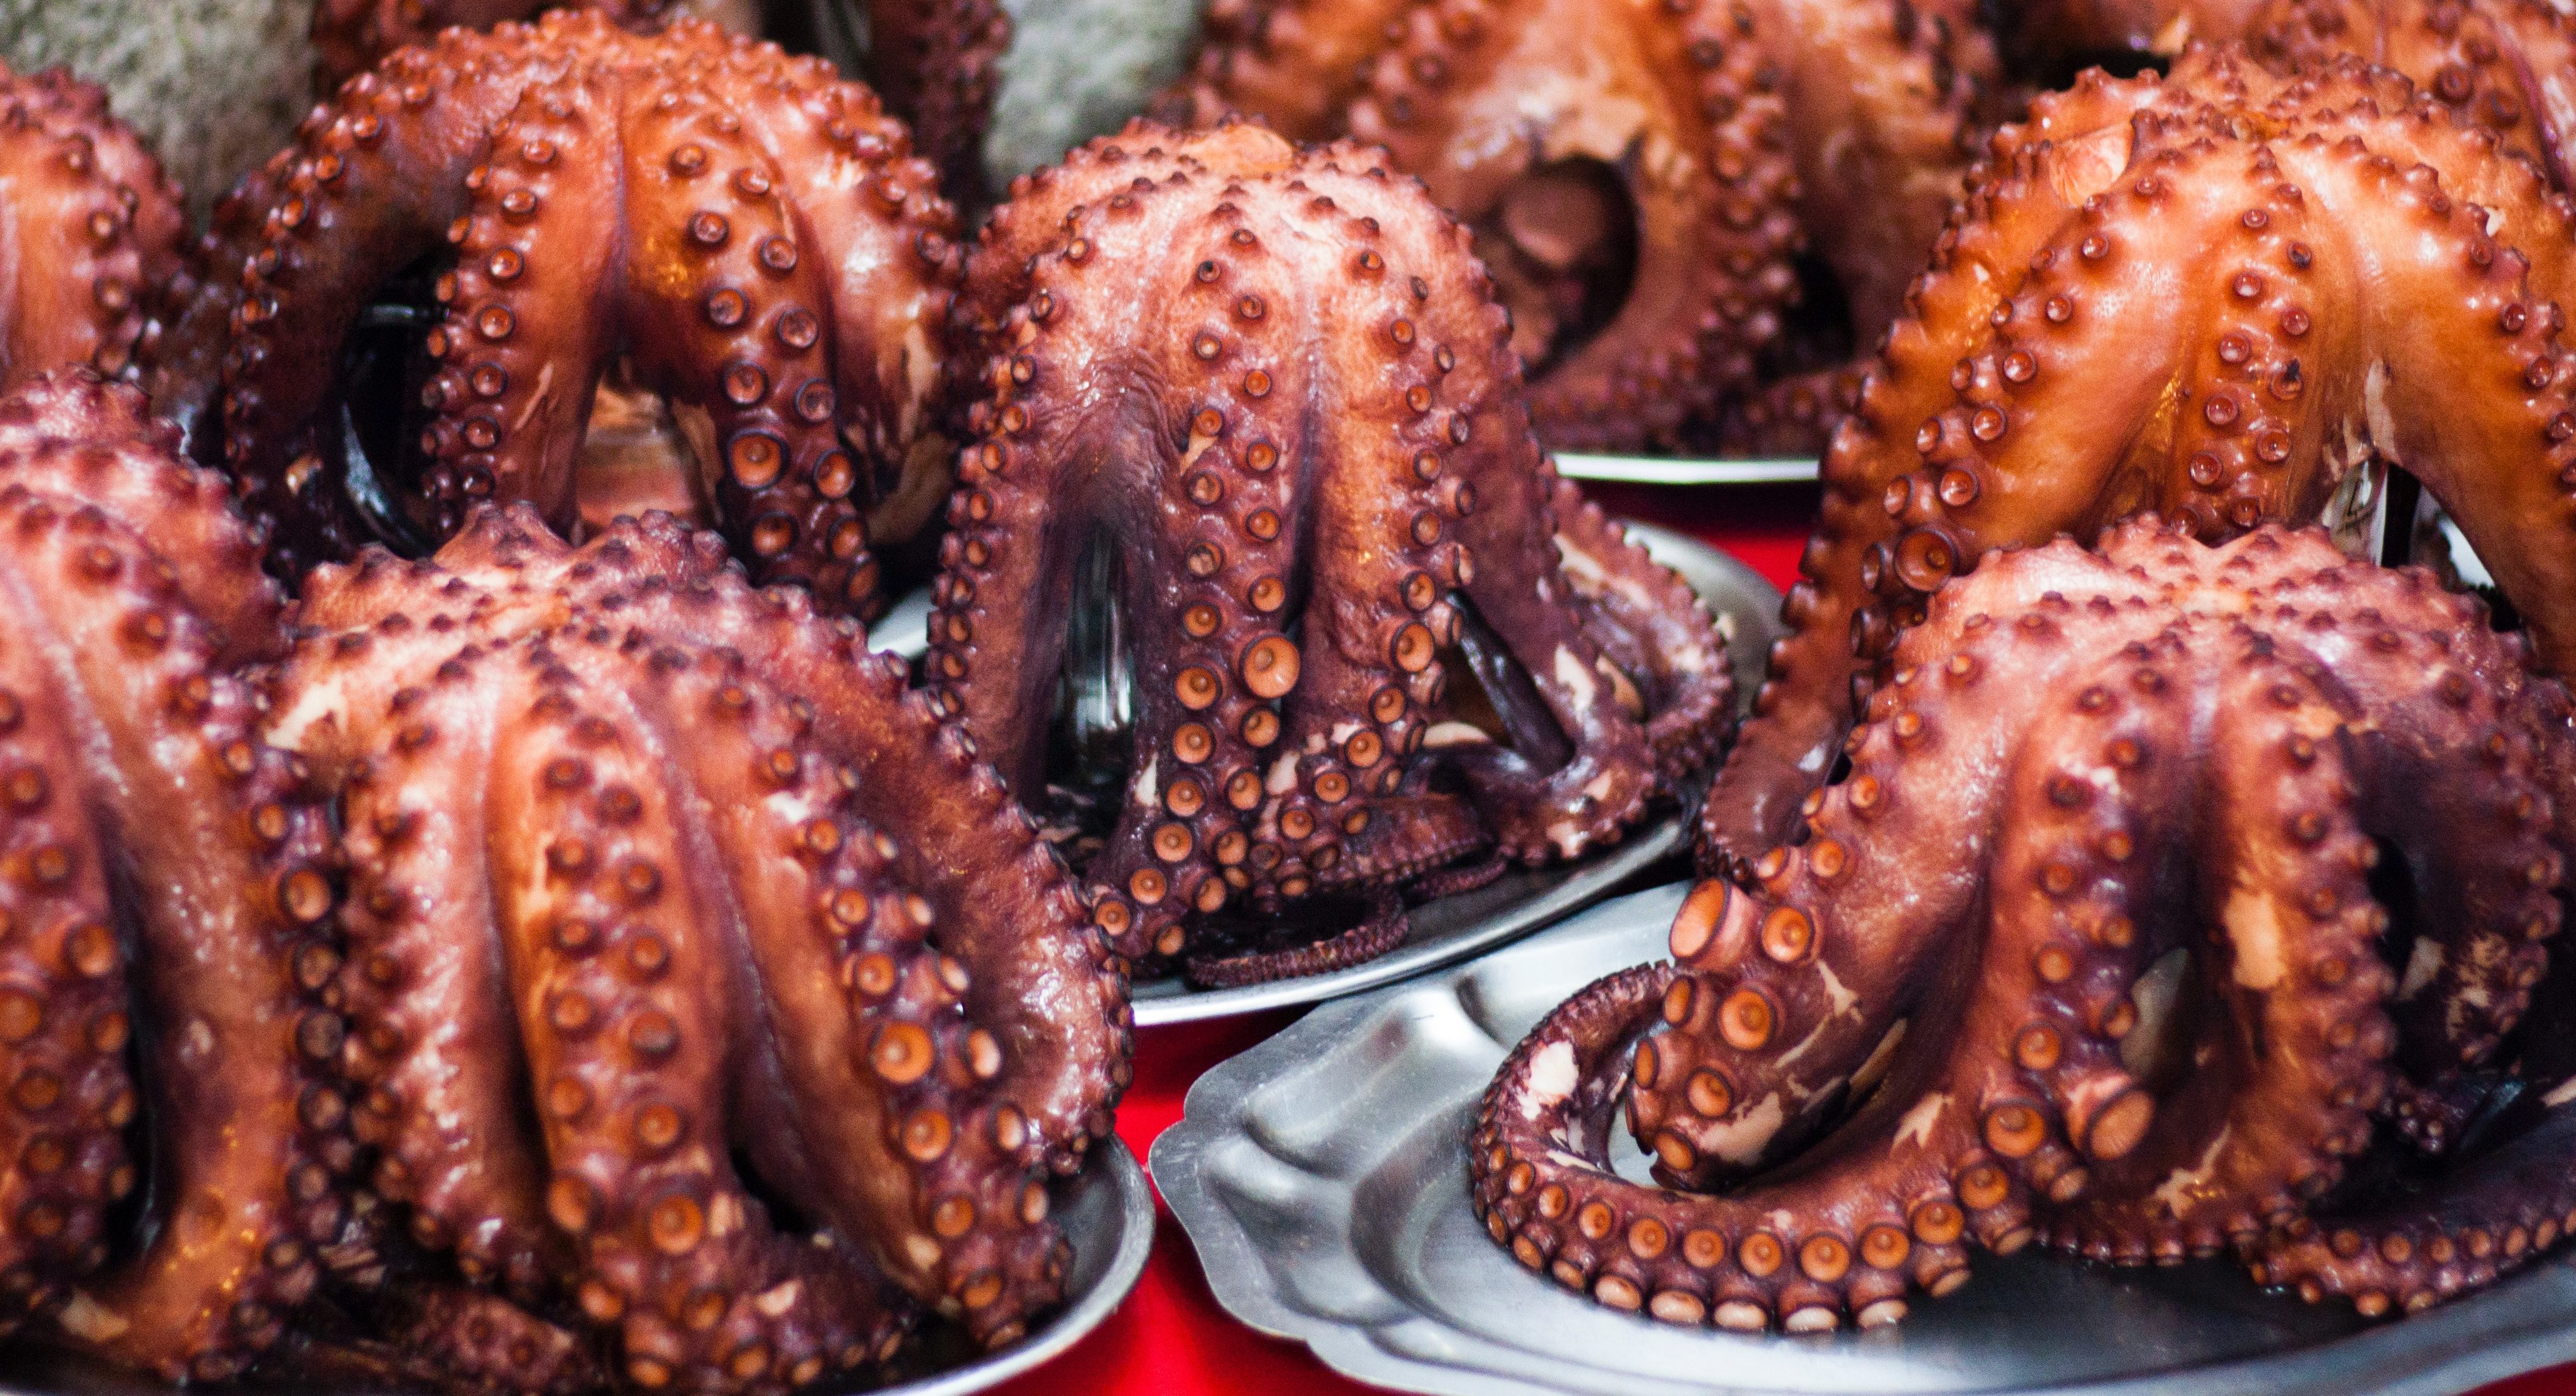 Russia seizes five Japanese octopus fishing vessels - Undercurrent News